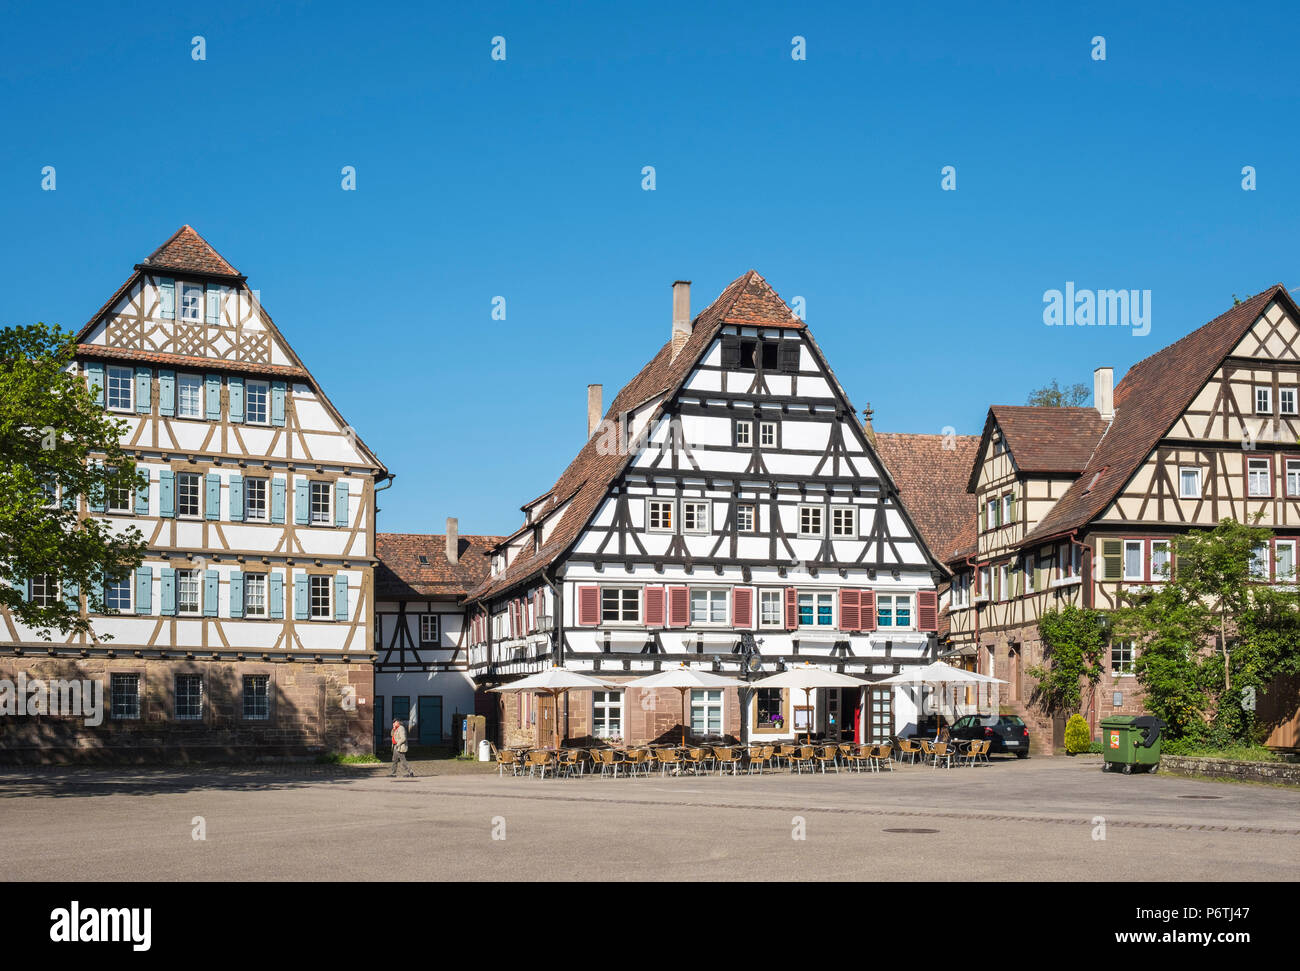 Germany, Baden-WÃ¼rttemberg, Maulbronn. Historic half-timber buildings in the monastery village. Stock Photo